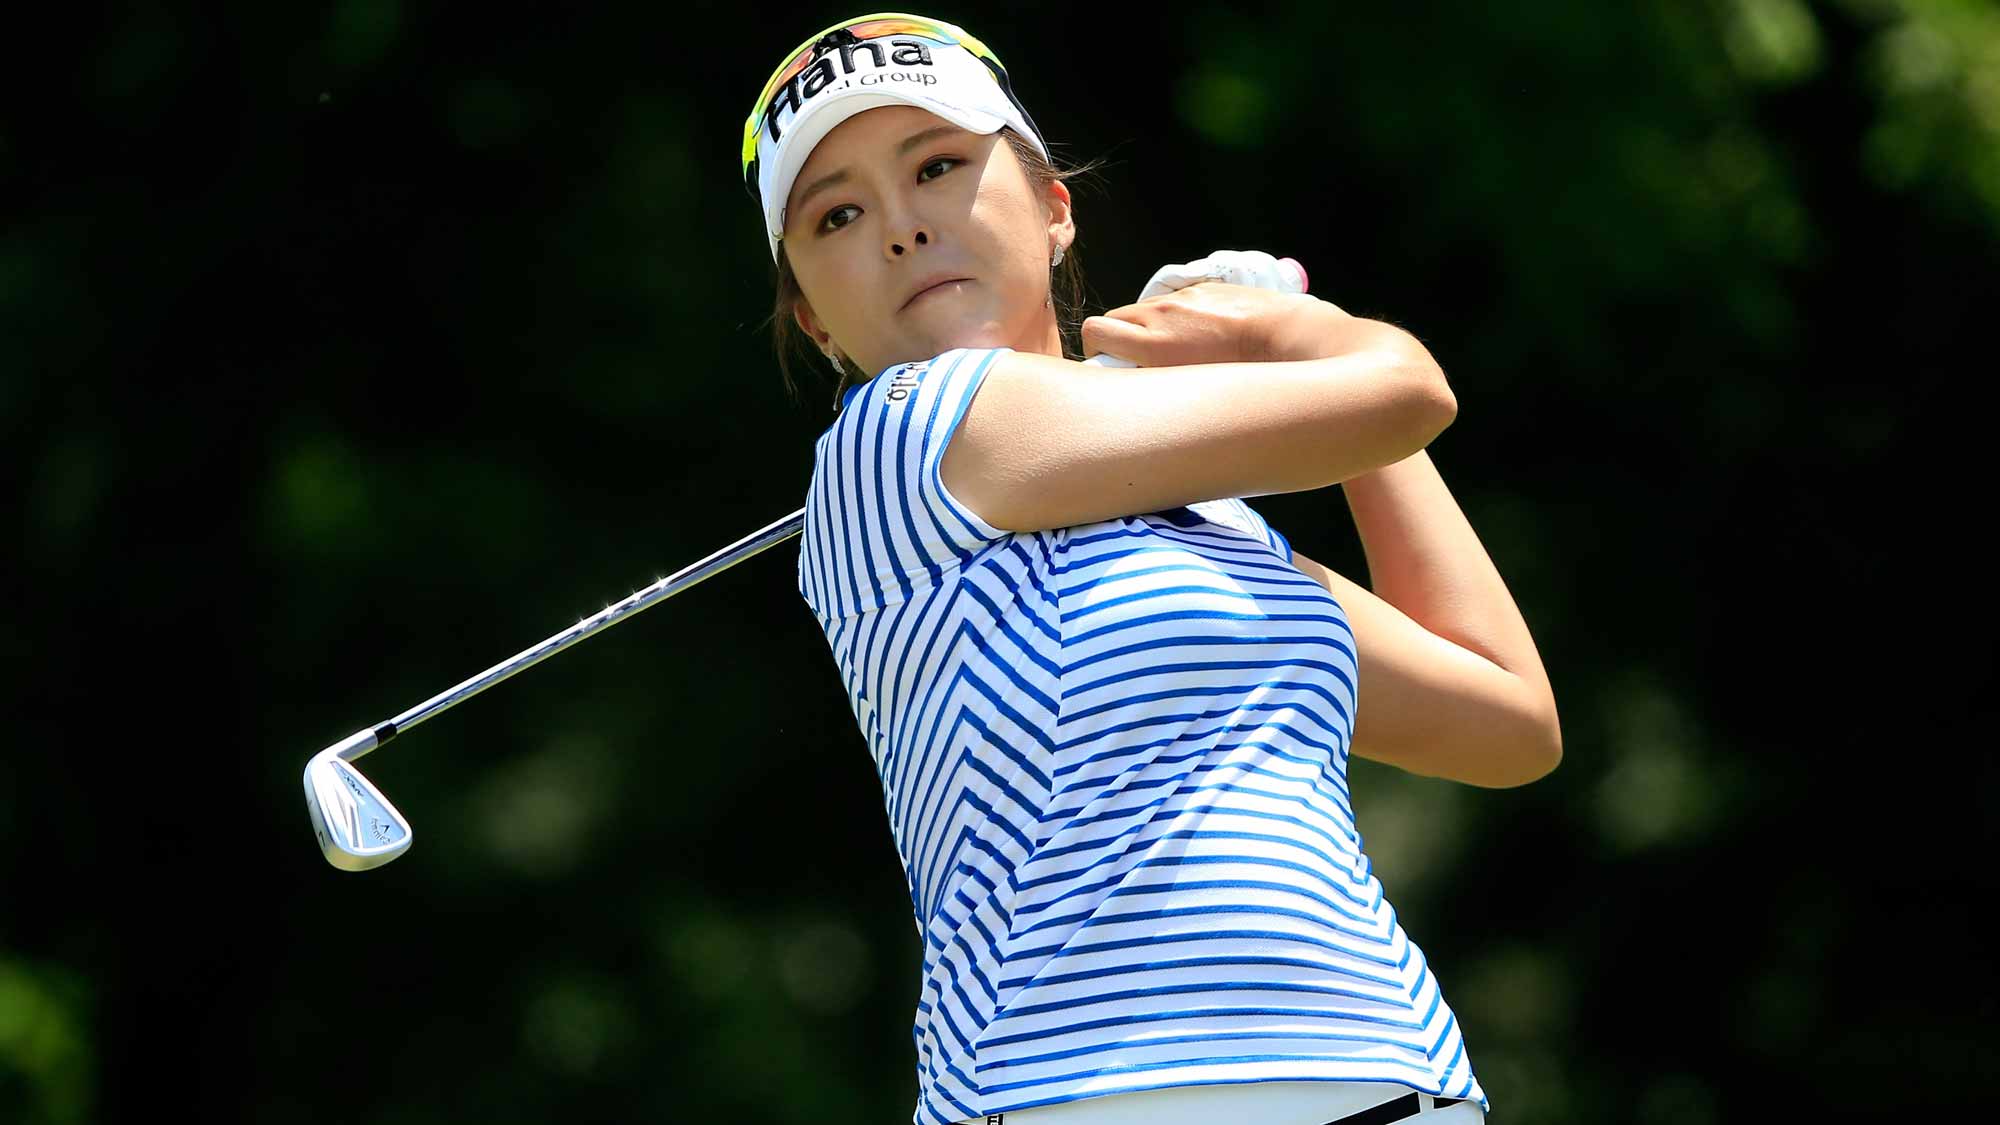 Mi Jung Hur of South Korea plays a shot on the third hole during the second round of the Walmart NW Arkansas Championship Presented by P&G at Pinnacle Country Club